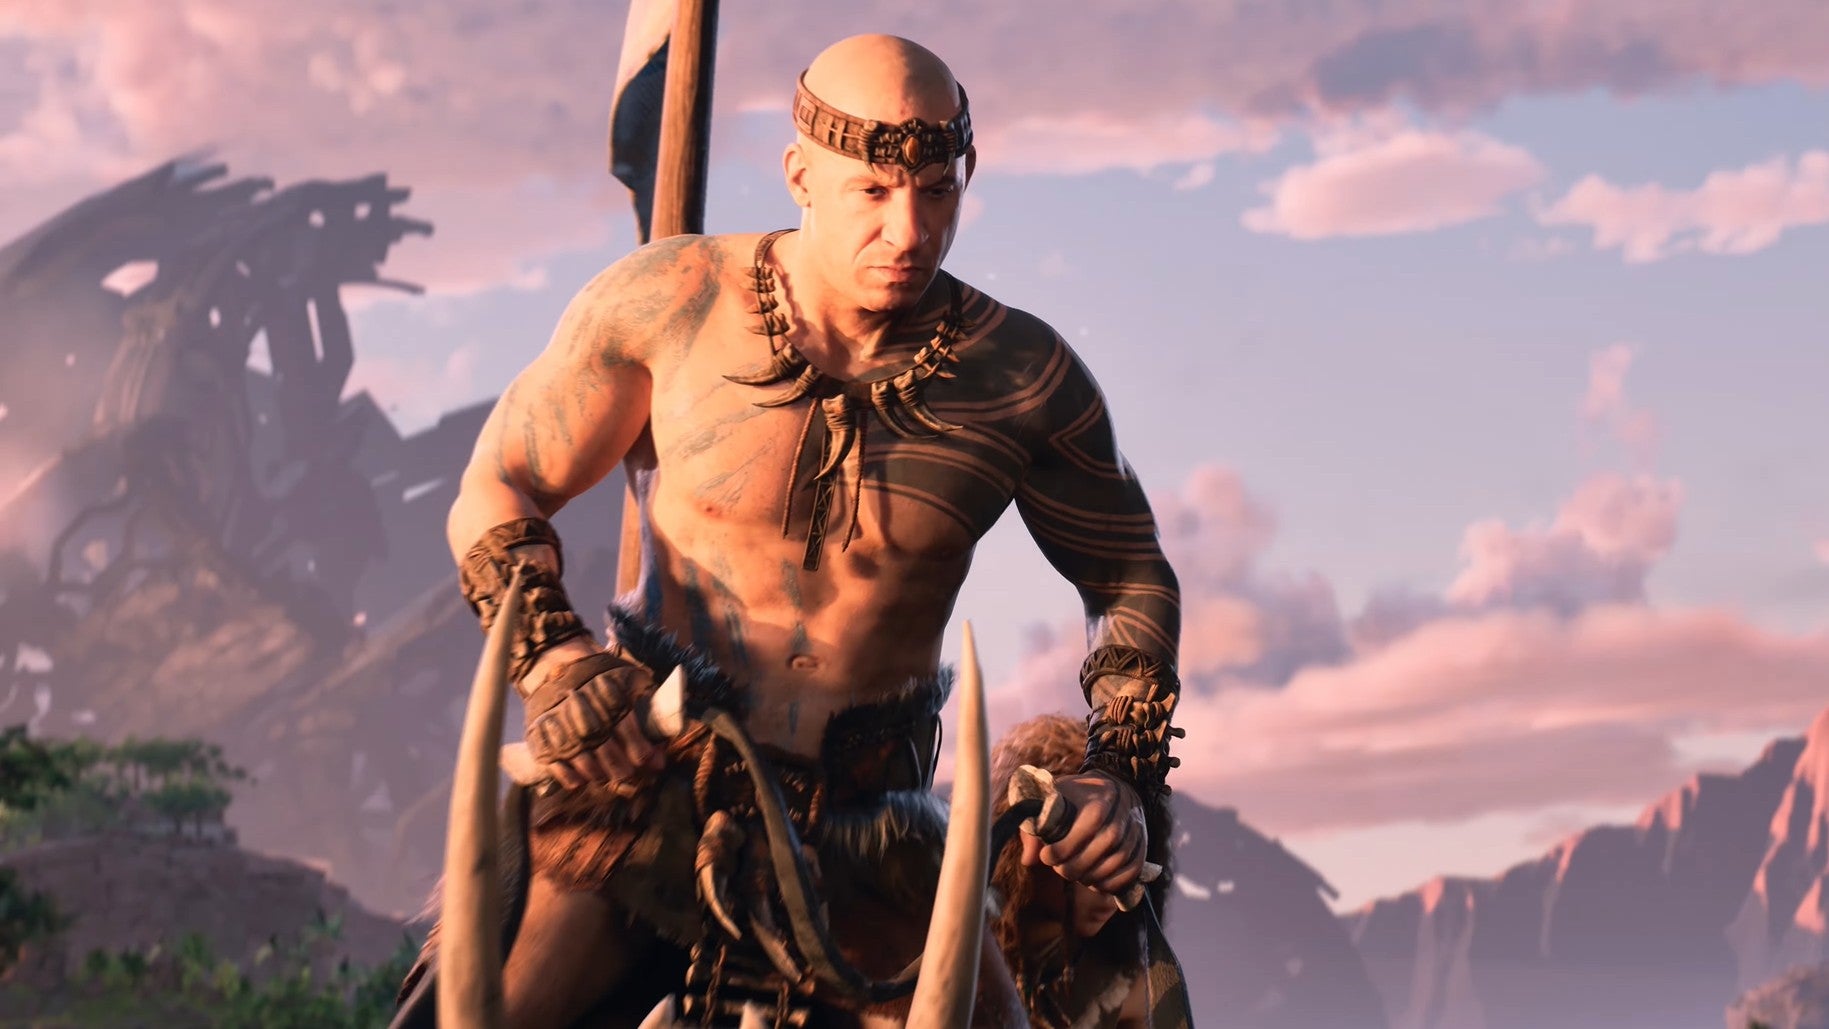 Image for Ark 2 gets new cinematic trailer with Vin Diesel, coming 2023